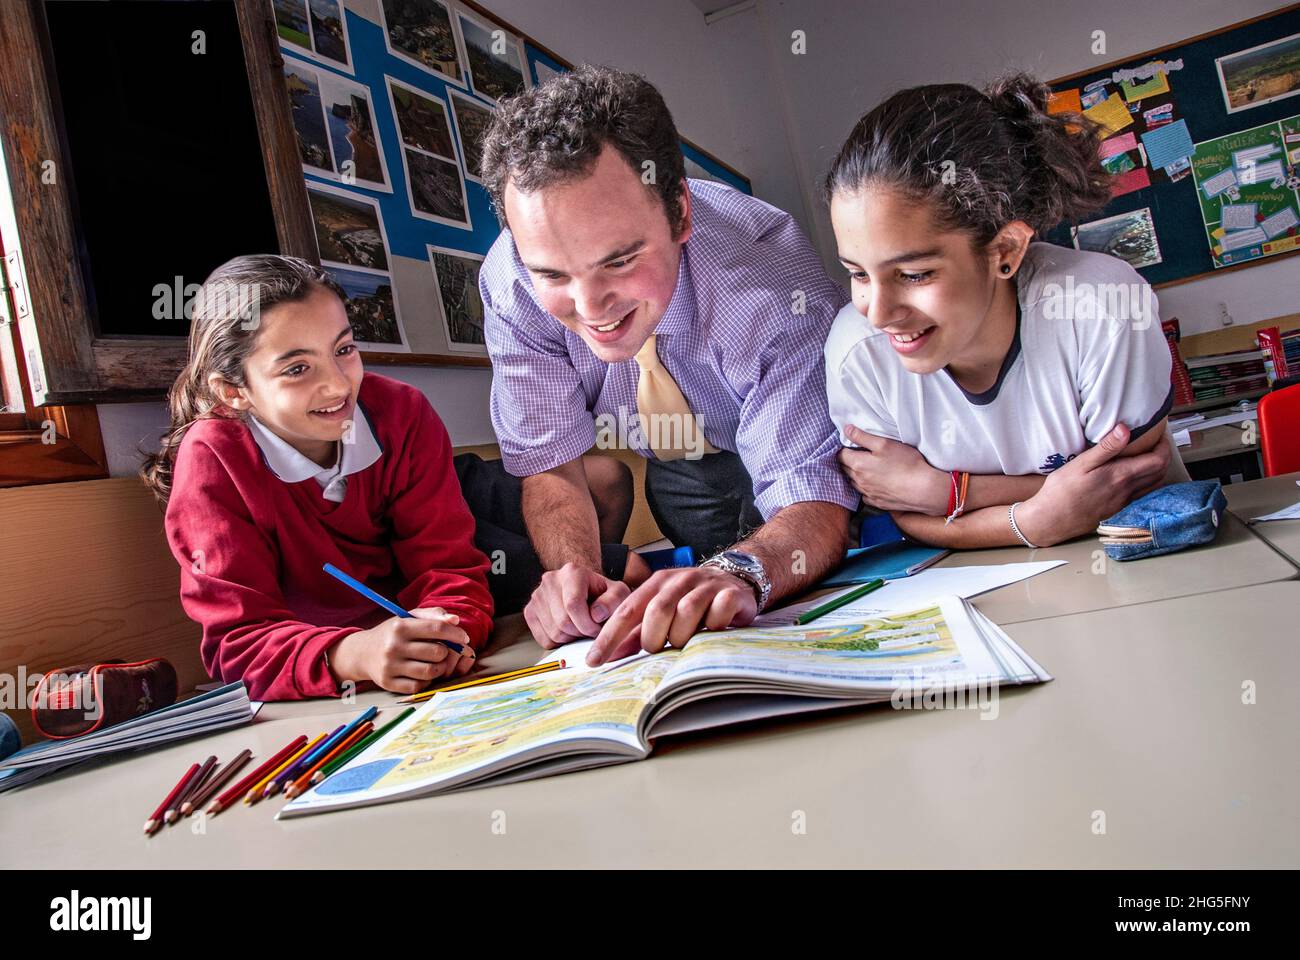 Teacher and junior school pupils 9-11 years in window lit school classroom relaxed happily interacting together on a geography mapping project Stock Photo